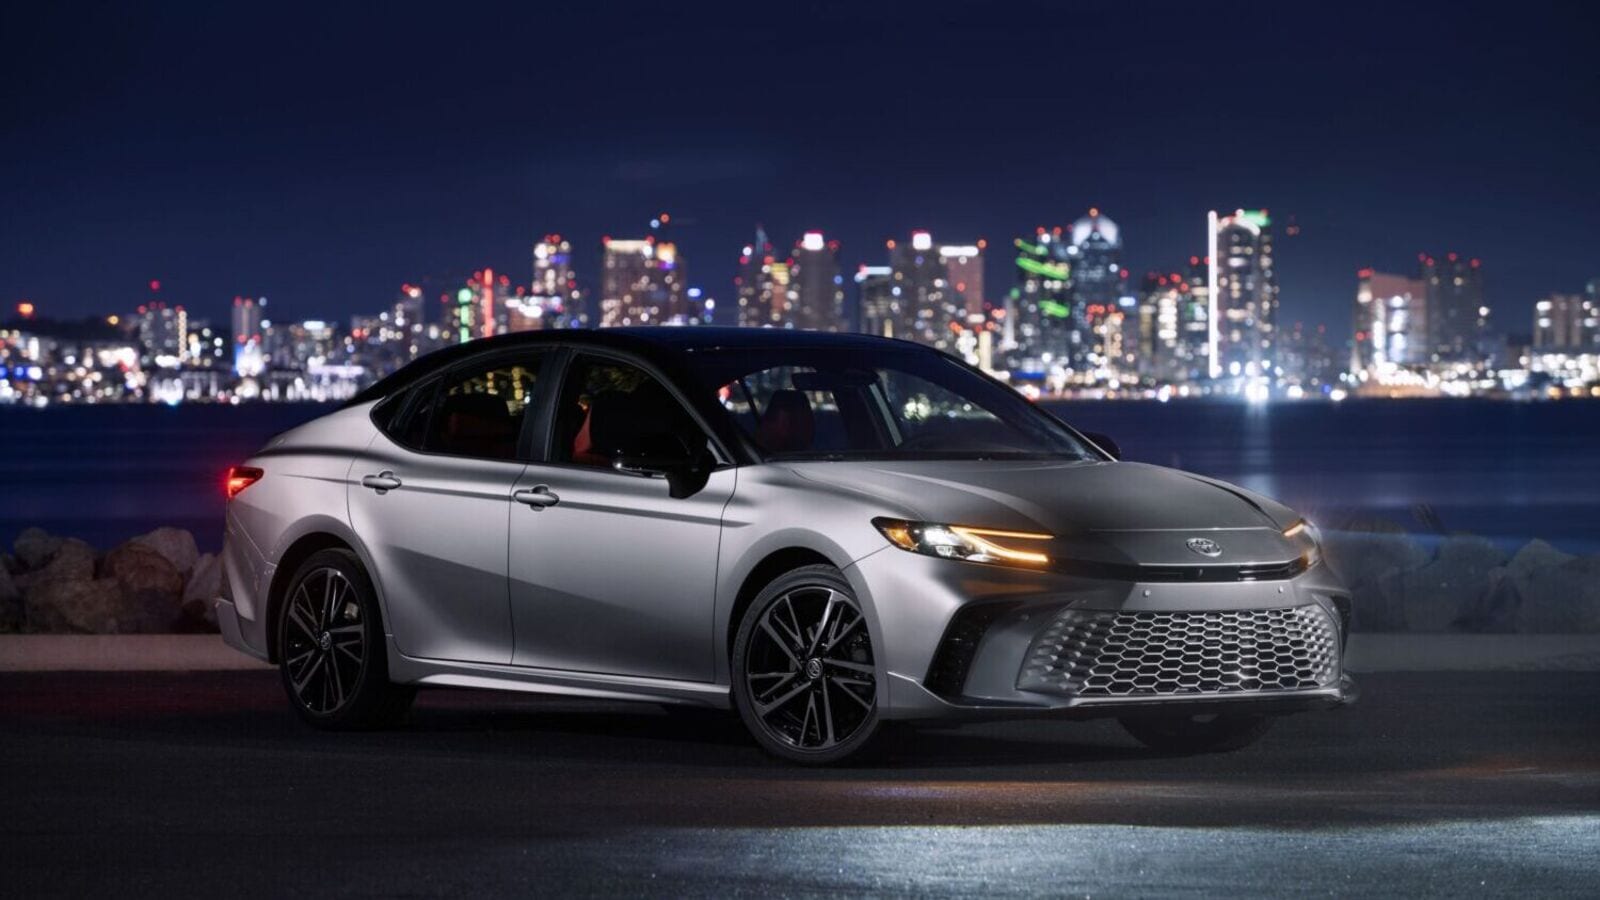 Is the 2025 Toyota Camry the mid-size family sedan of the future? Check details